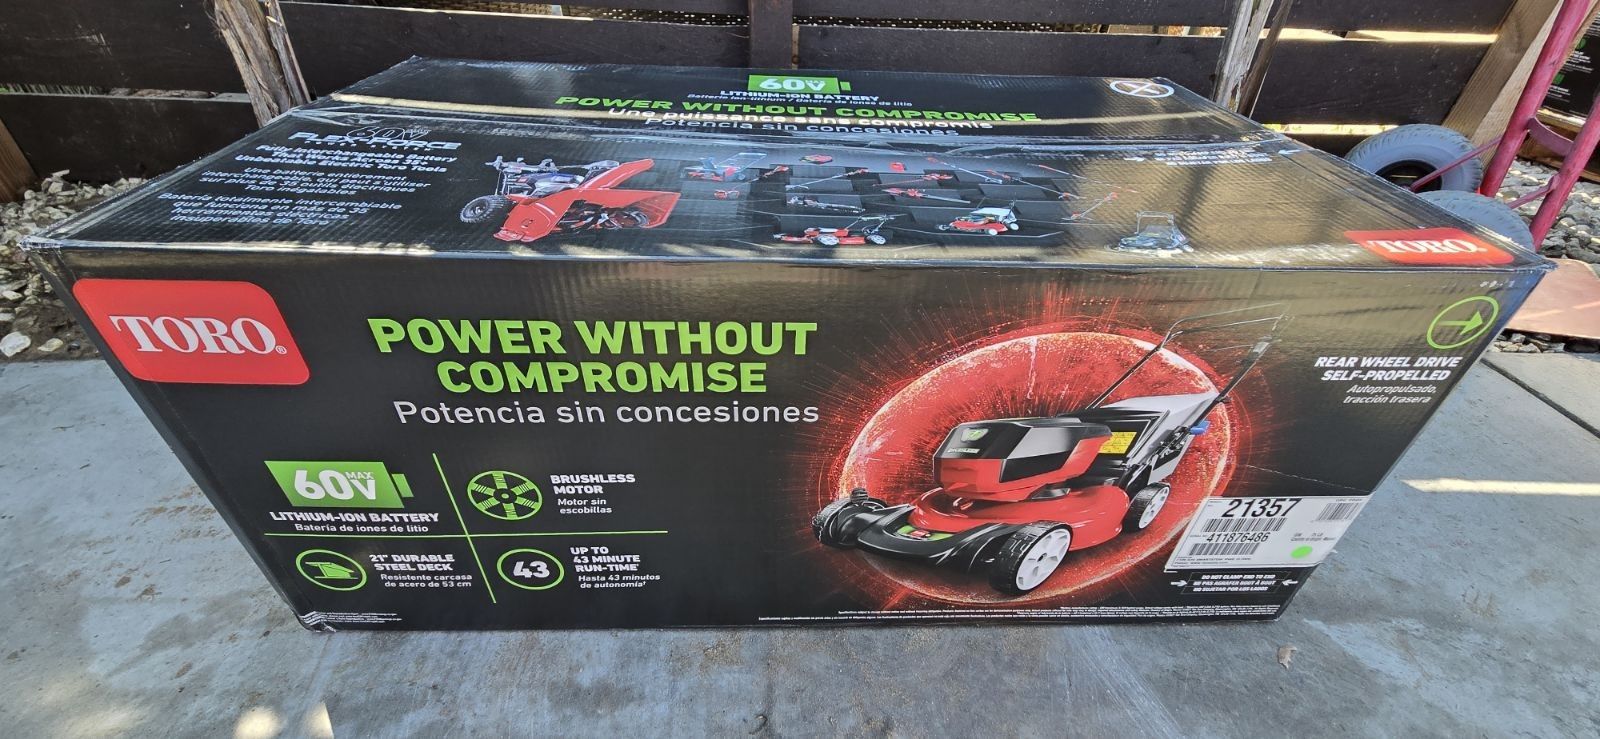 (NEW) TORO Lawn Mower with 5.0Ah Battery